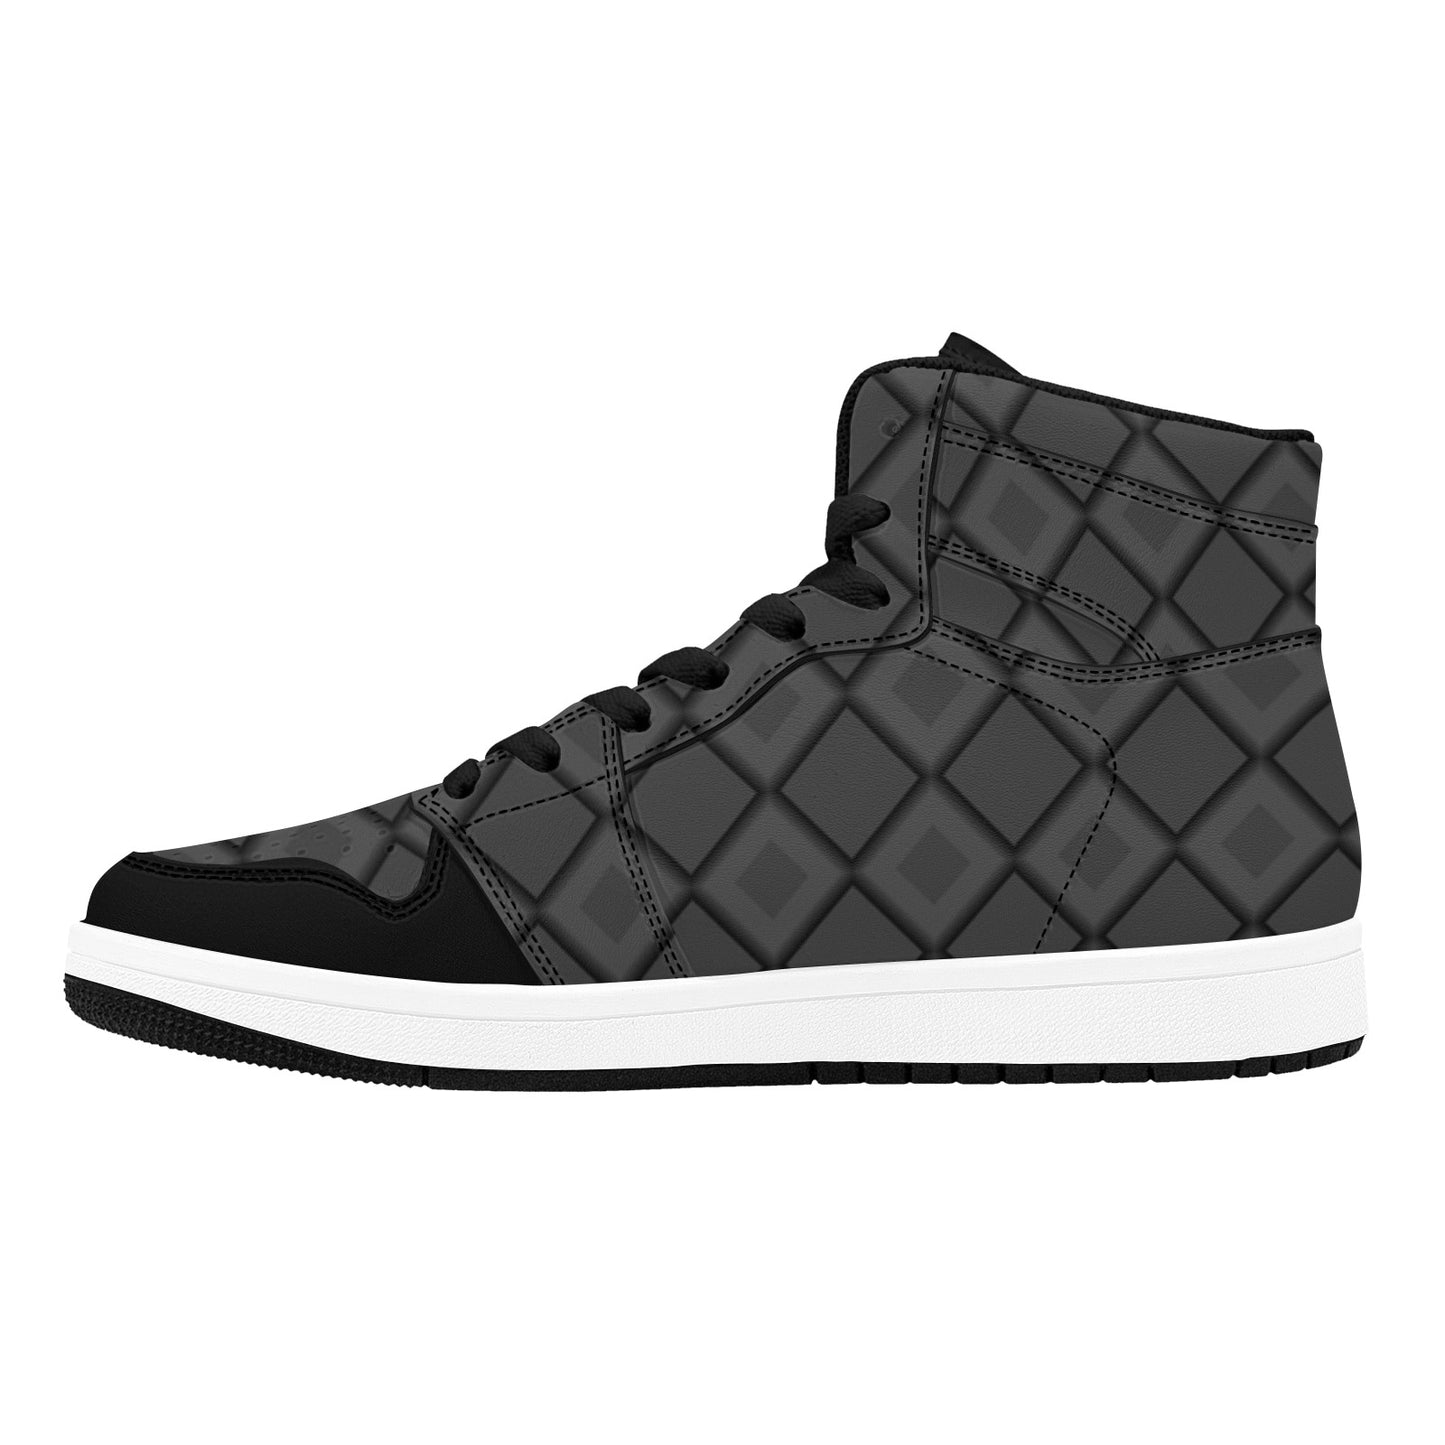 Black High Top Sneakers Squares Pattern High Top Sneakers Men's High Top Sneakers